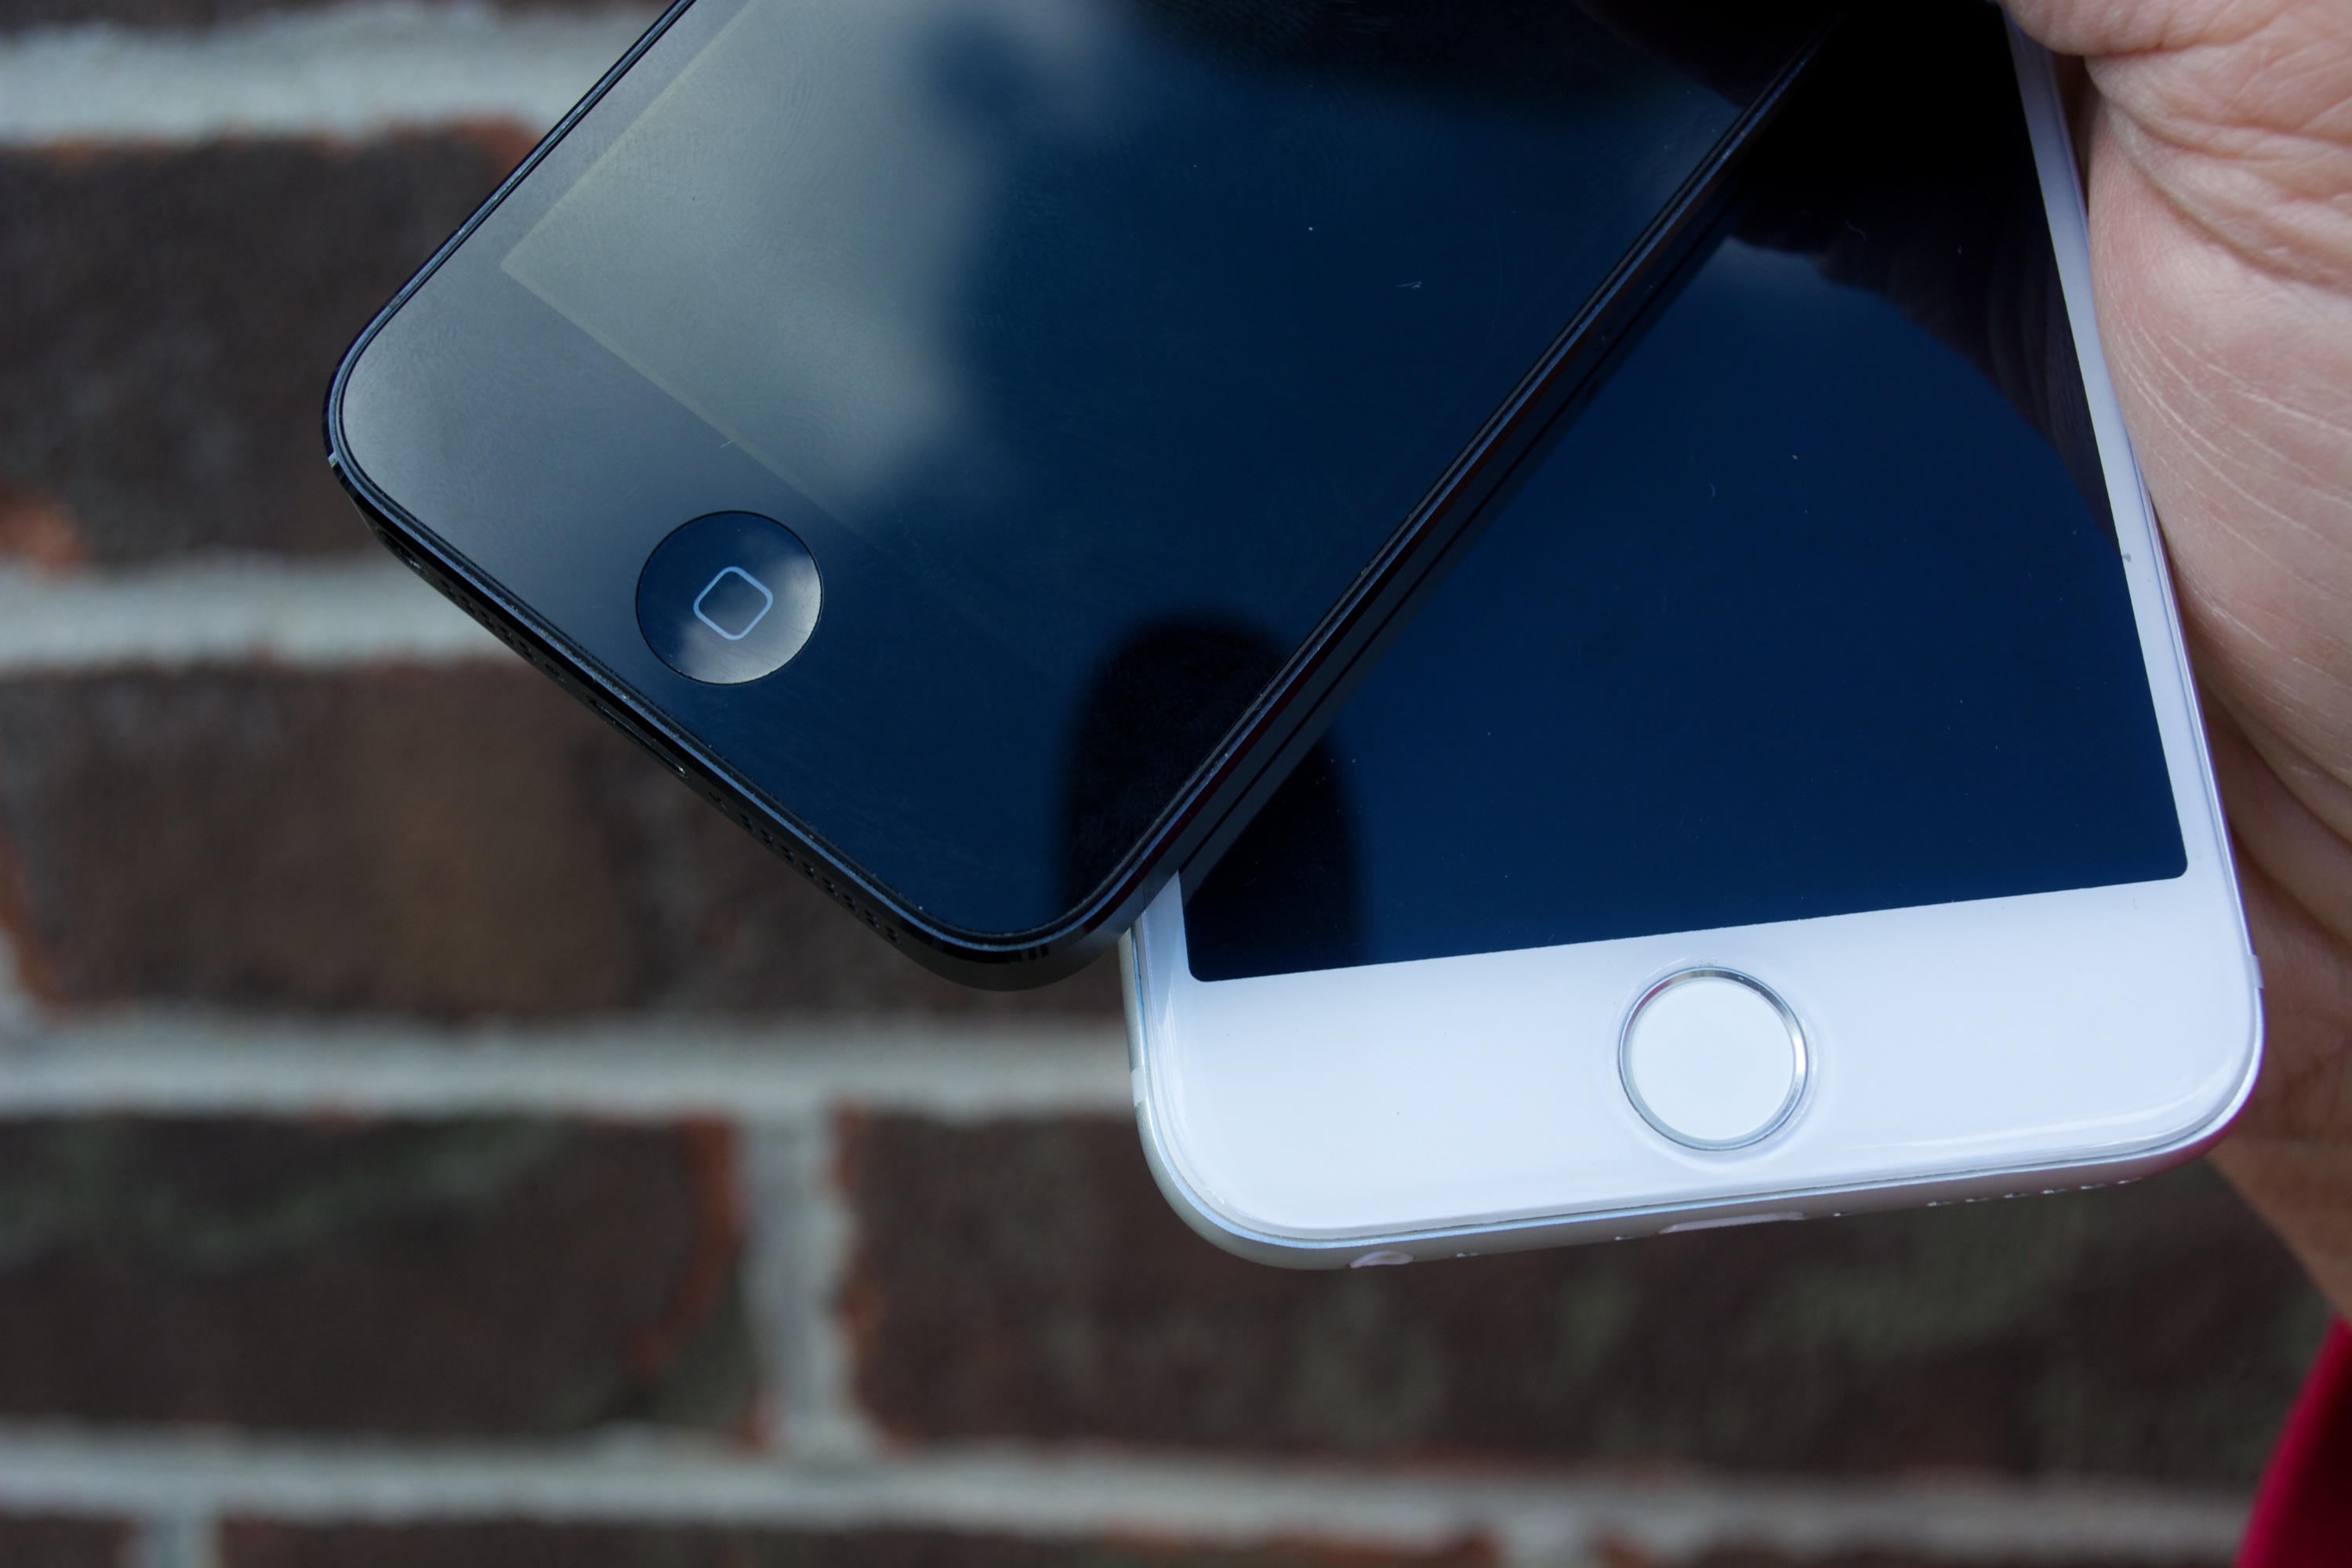 The iPhone 6 will offer Touch ID, like the iPhone 5s.